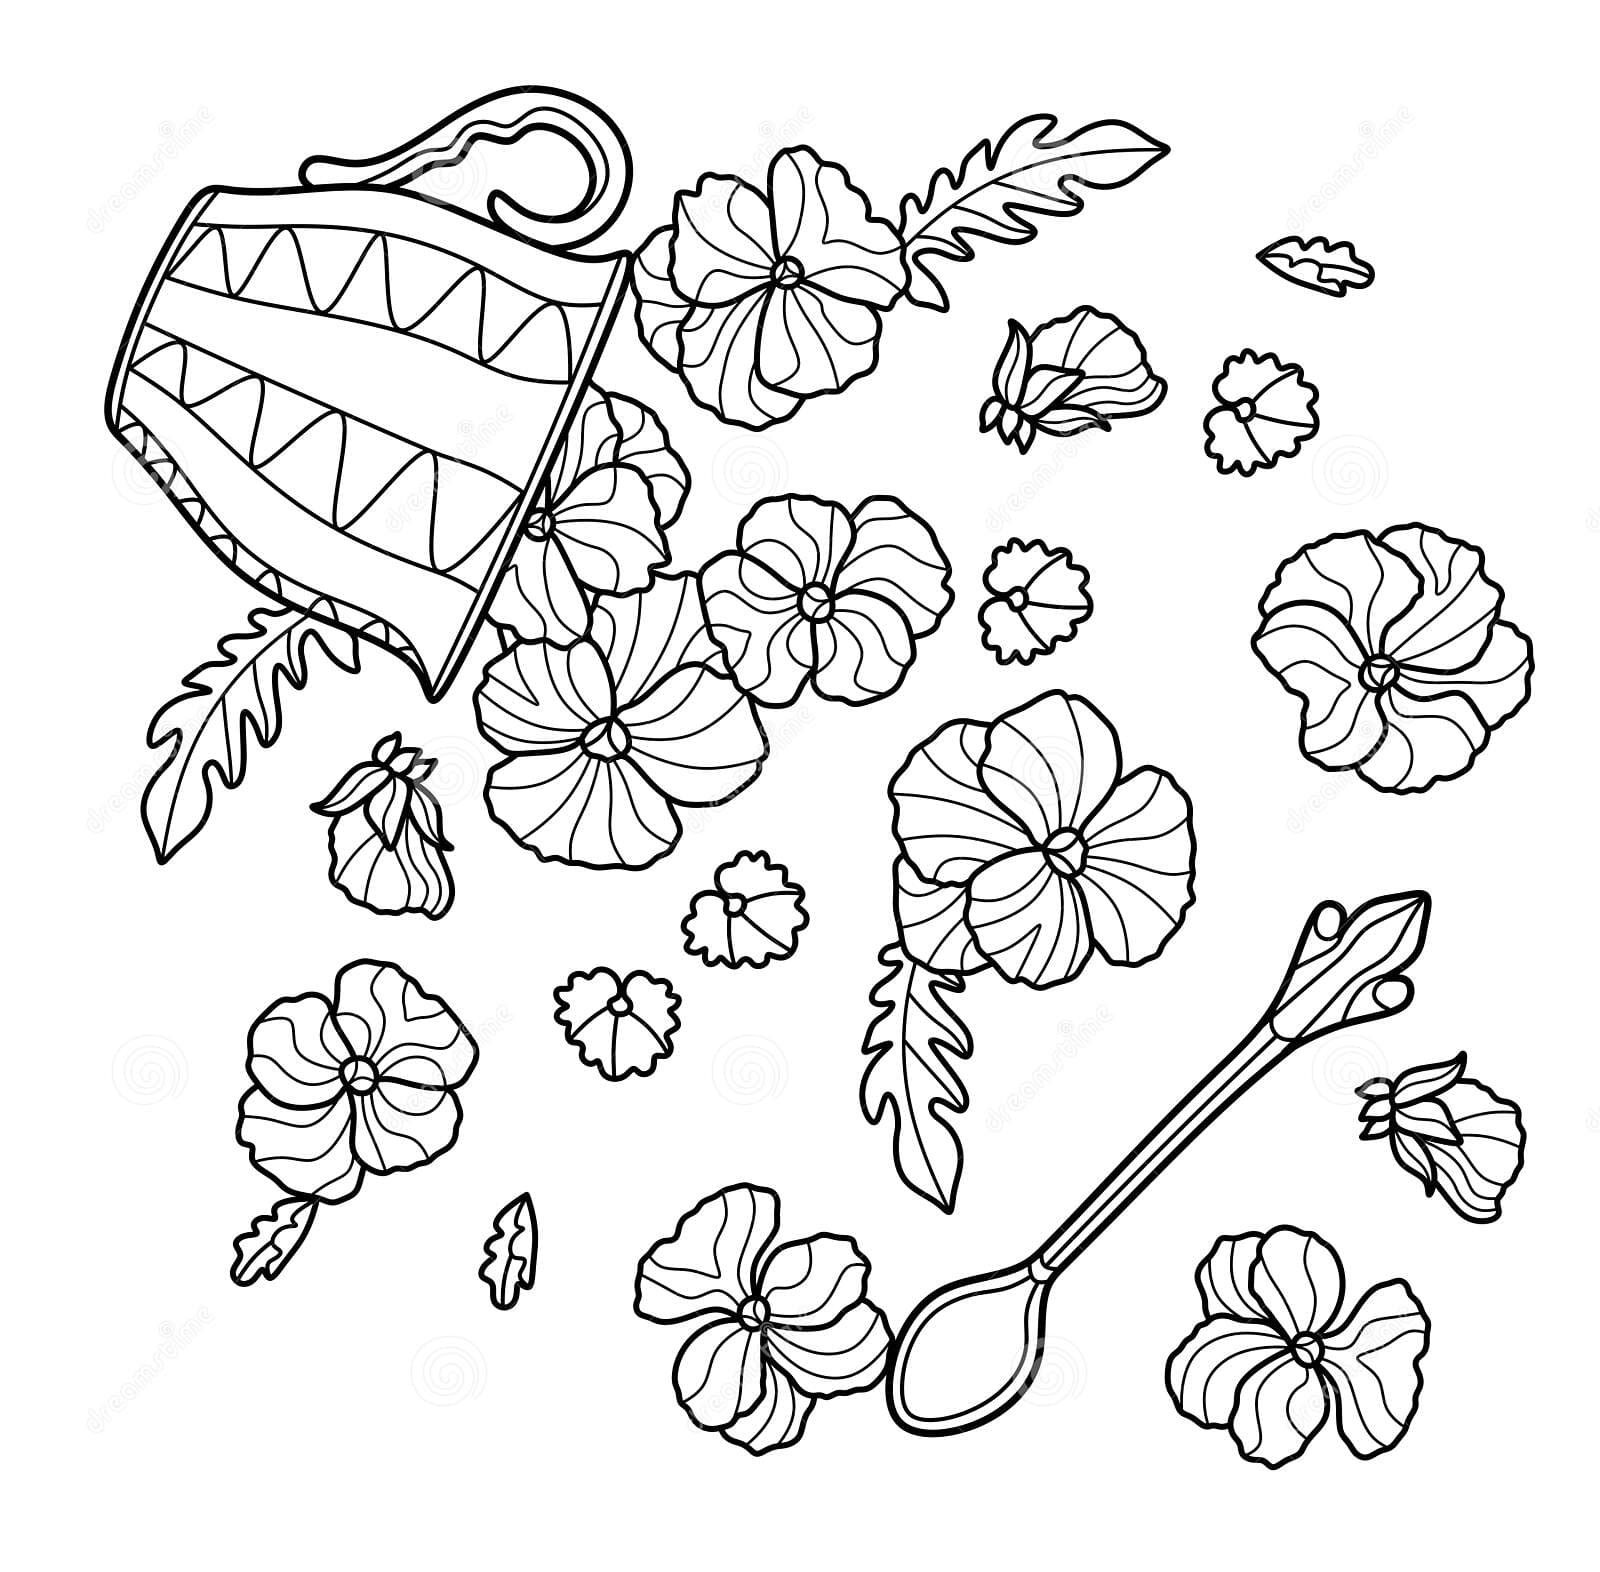 Cup, Spoon And Pansies Coloring Page